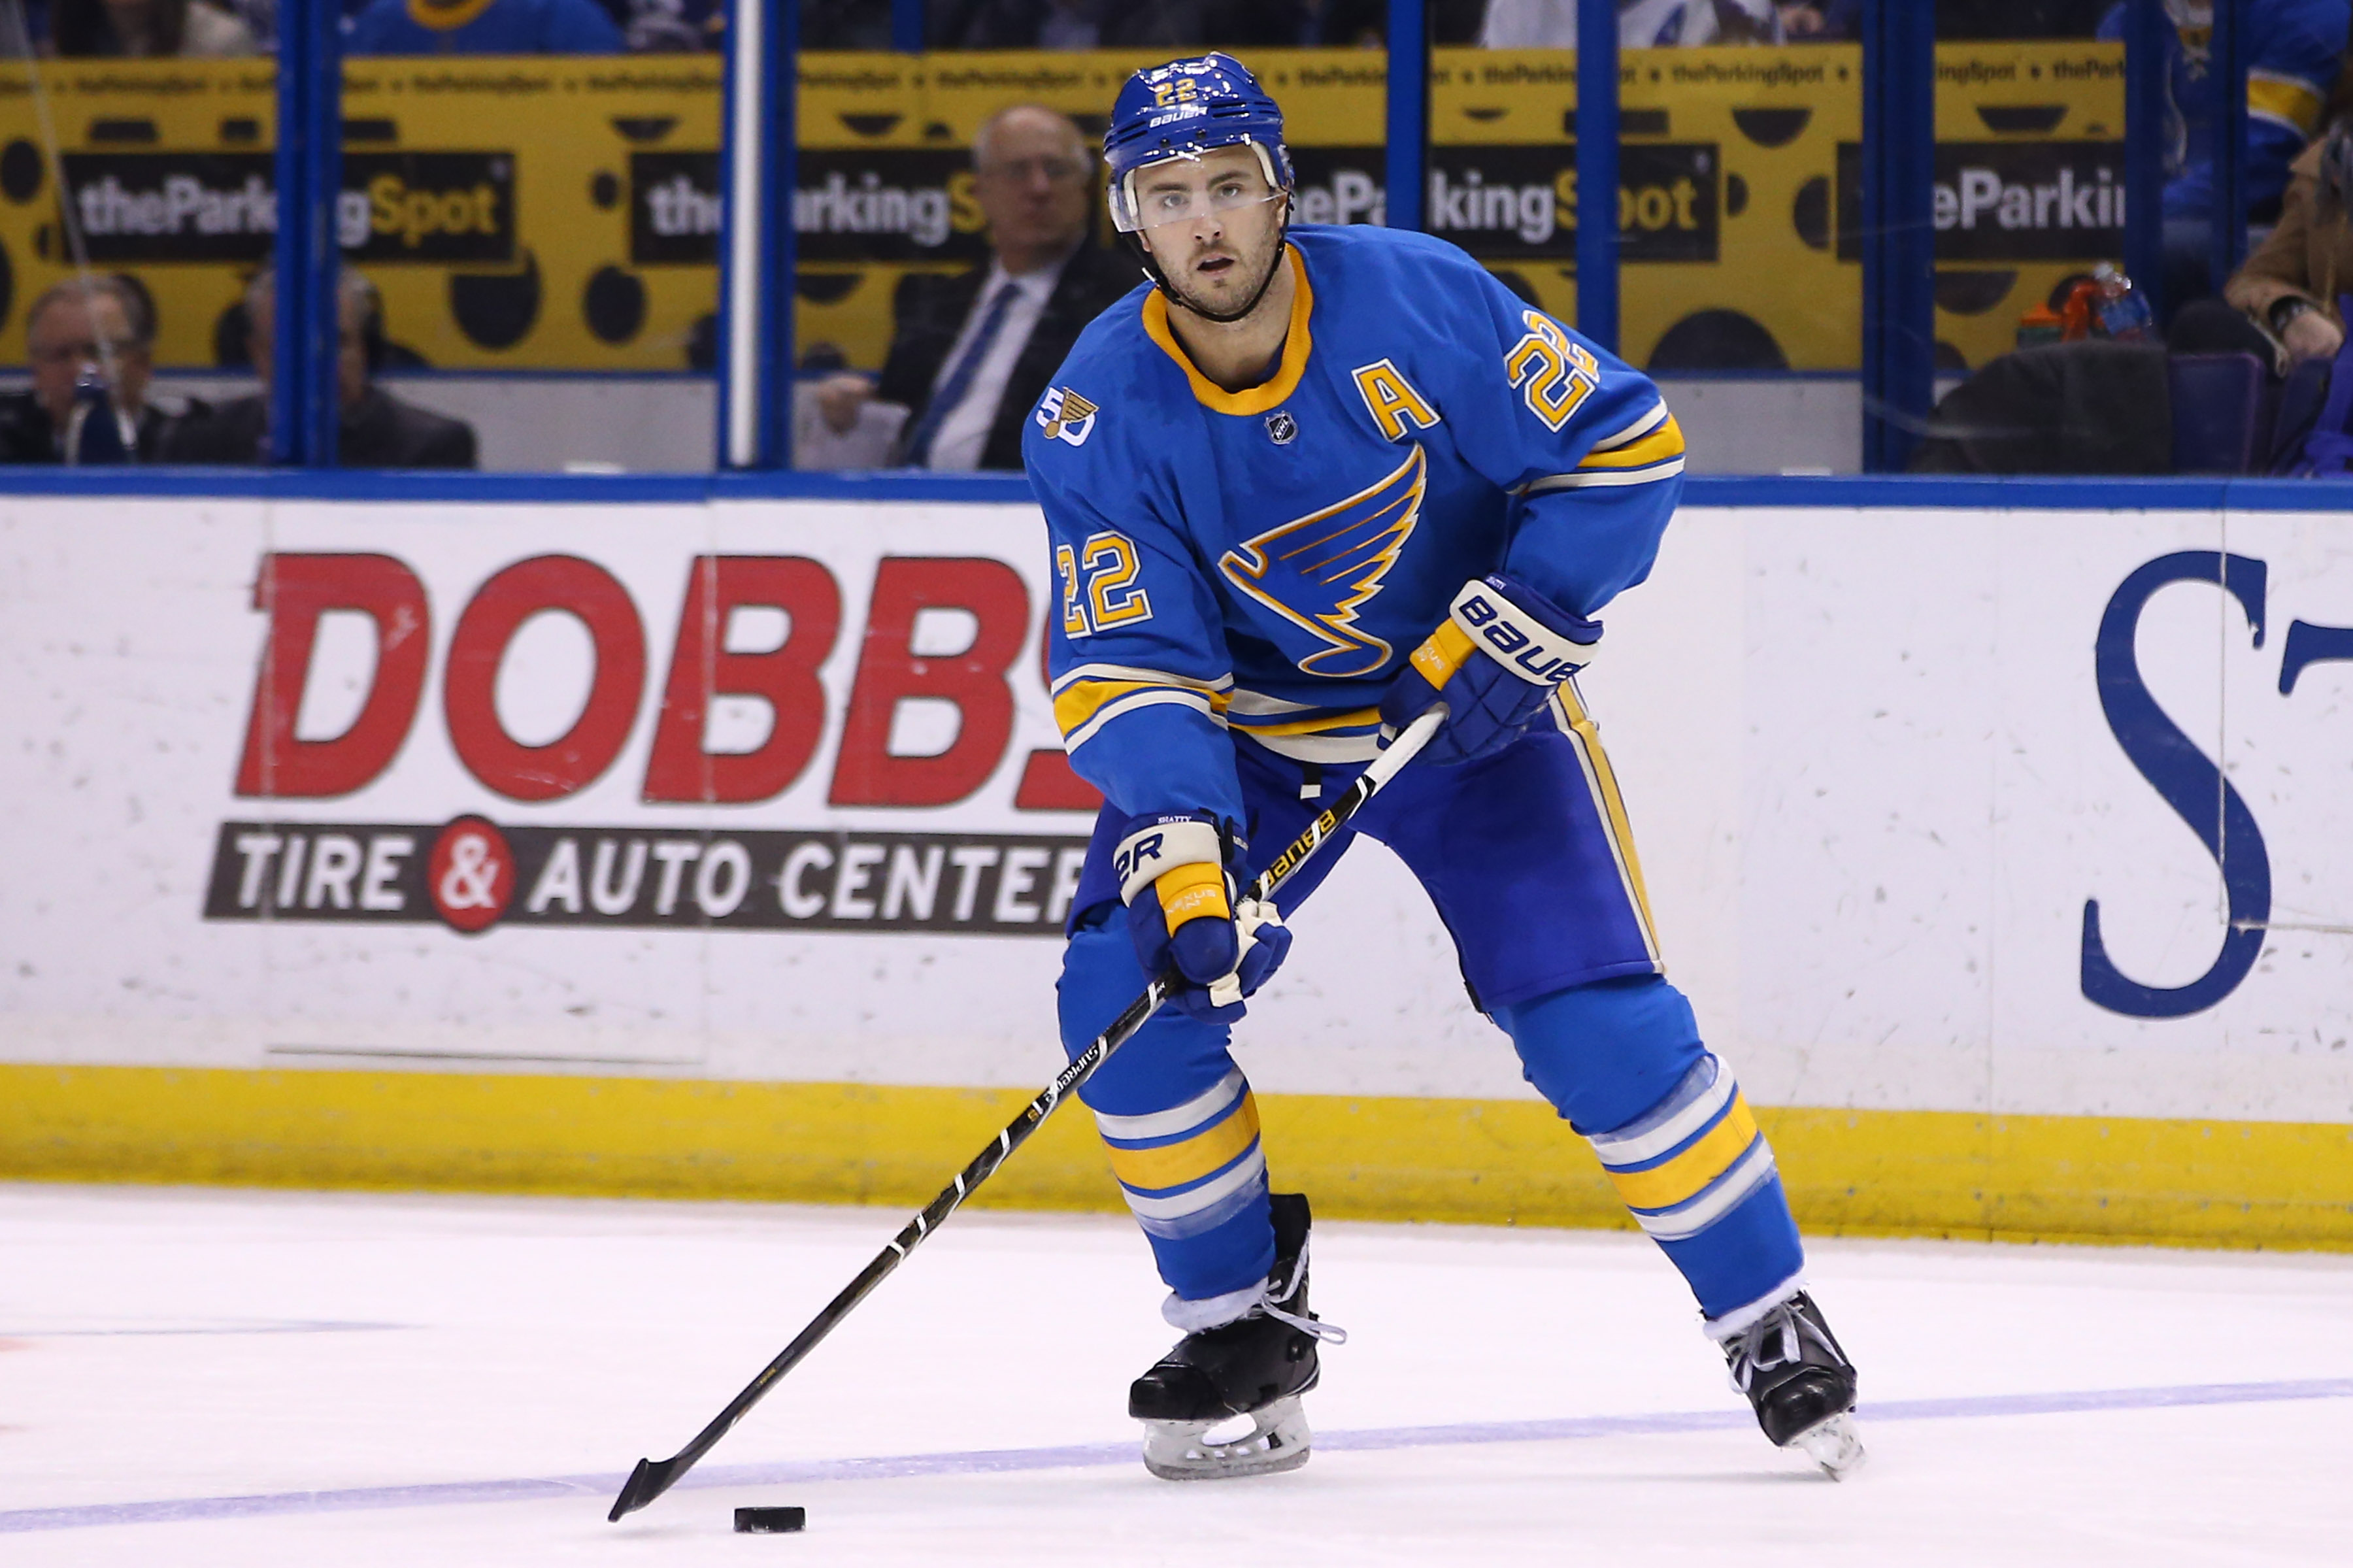 Kevin Shattenkirk Reportedly Open to Playing with Toronto Maple Leafs - Tip of the Tower